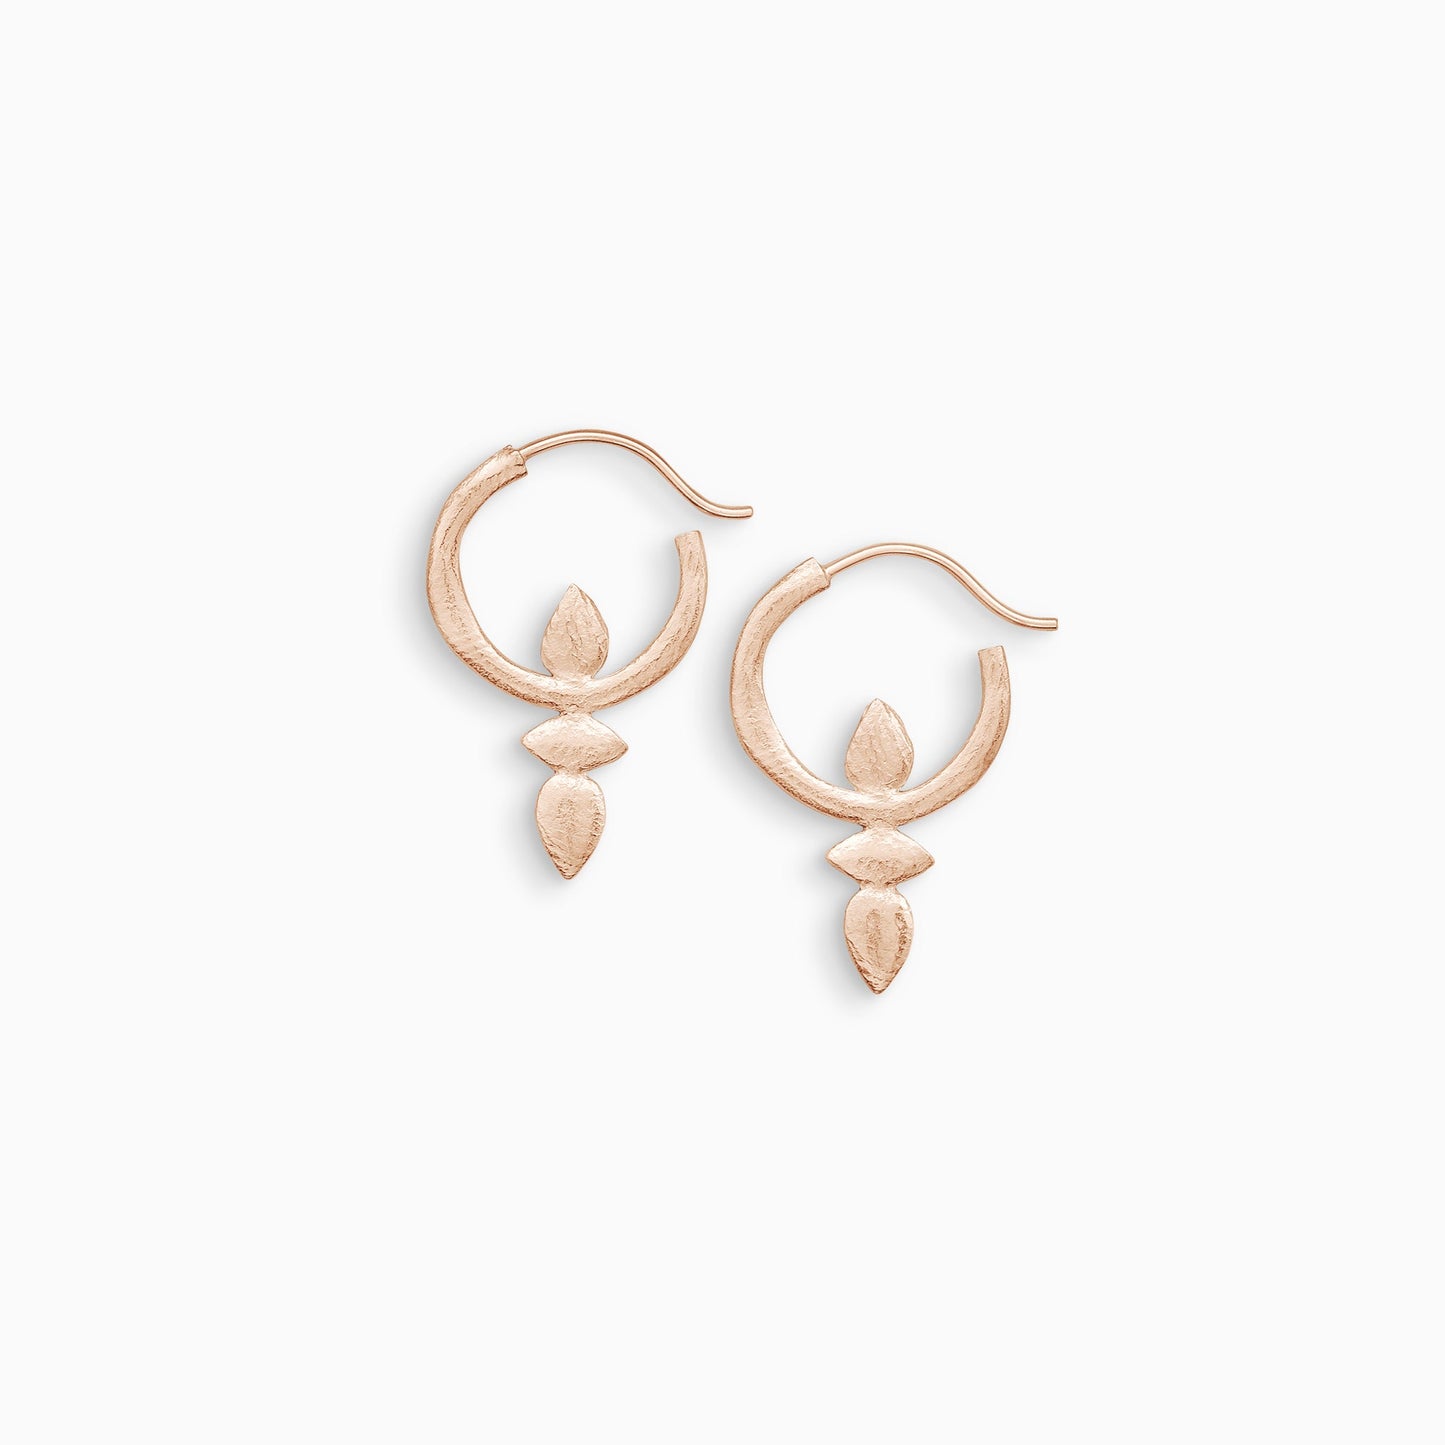 A pair of 18ct Fairtrade rose gold hoop earrings with a stud fastening. Small organic lozenge and teardrop shaped forms are attached below and inside the hoop. 18mm x 30mm 